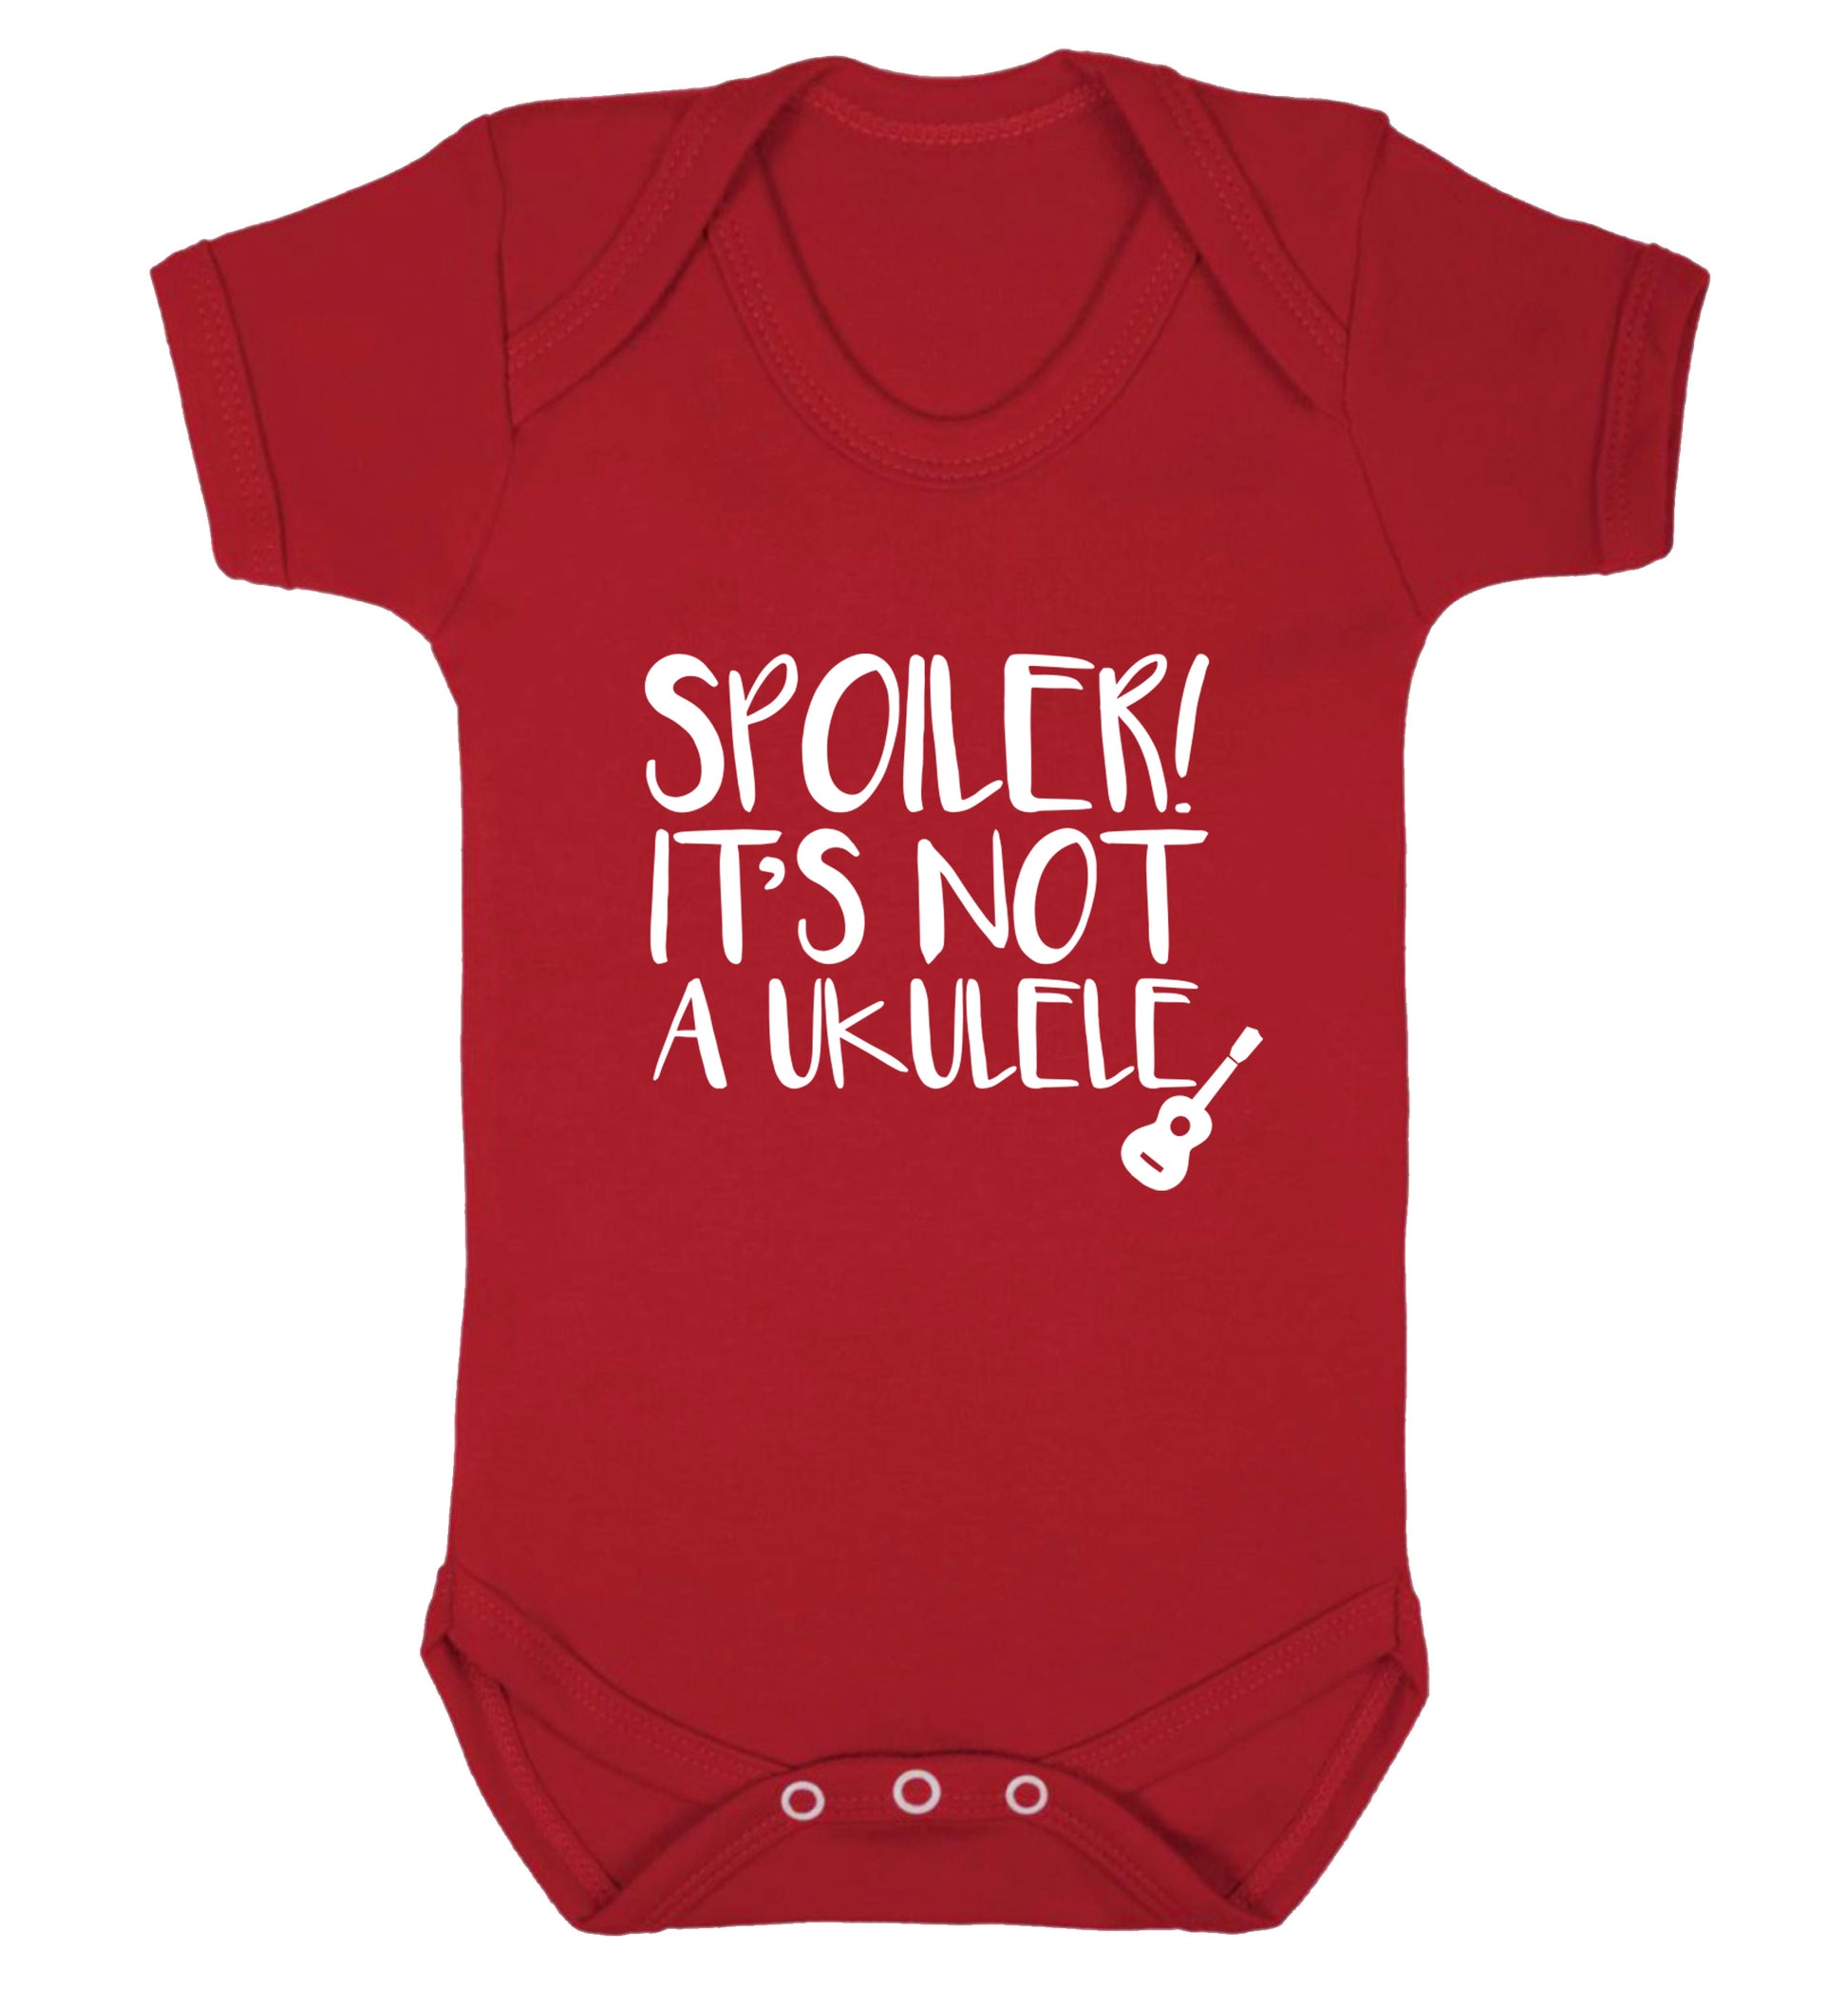 Spoiler it's not a ukulele Baby Vest red 18-24 months